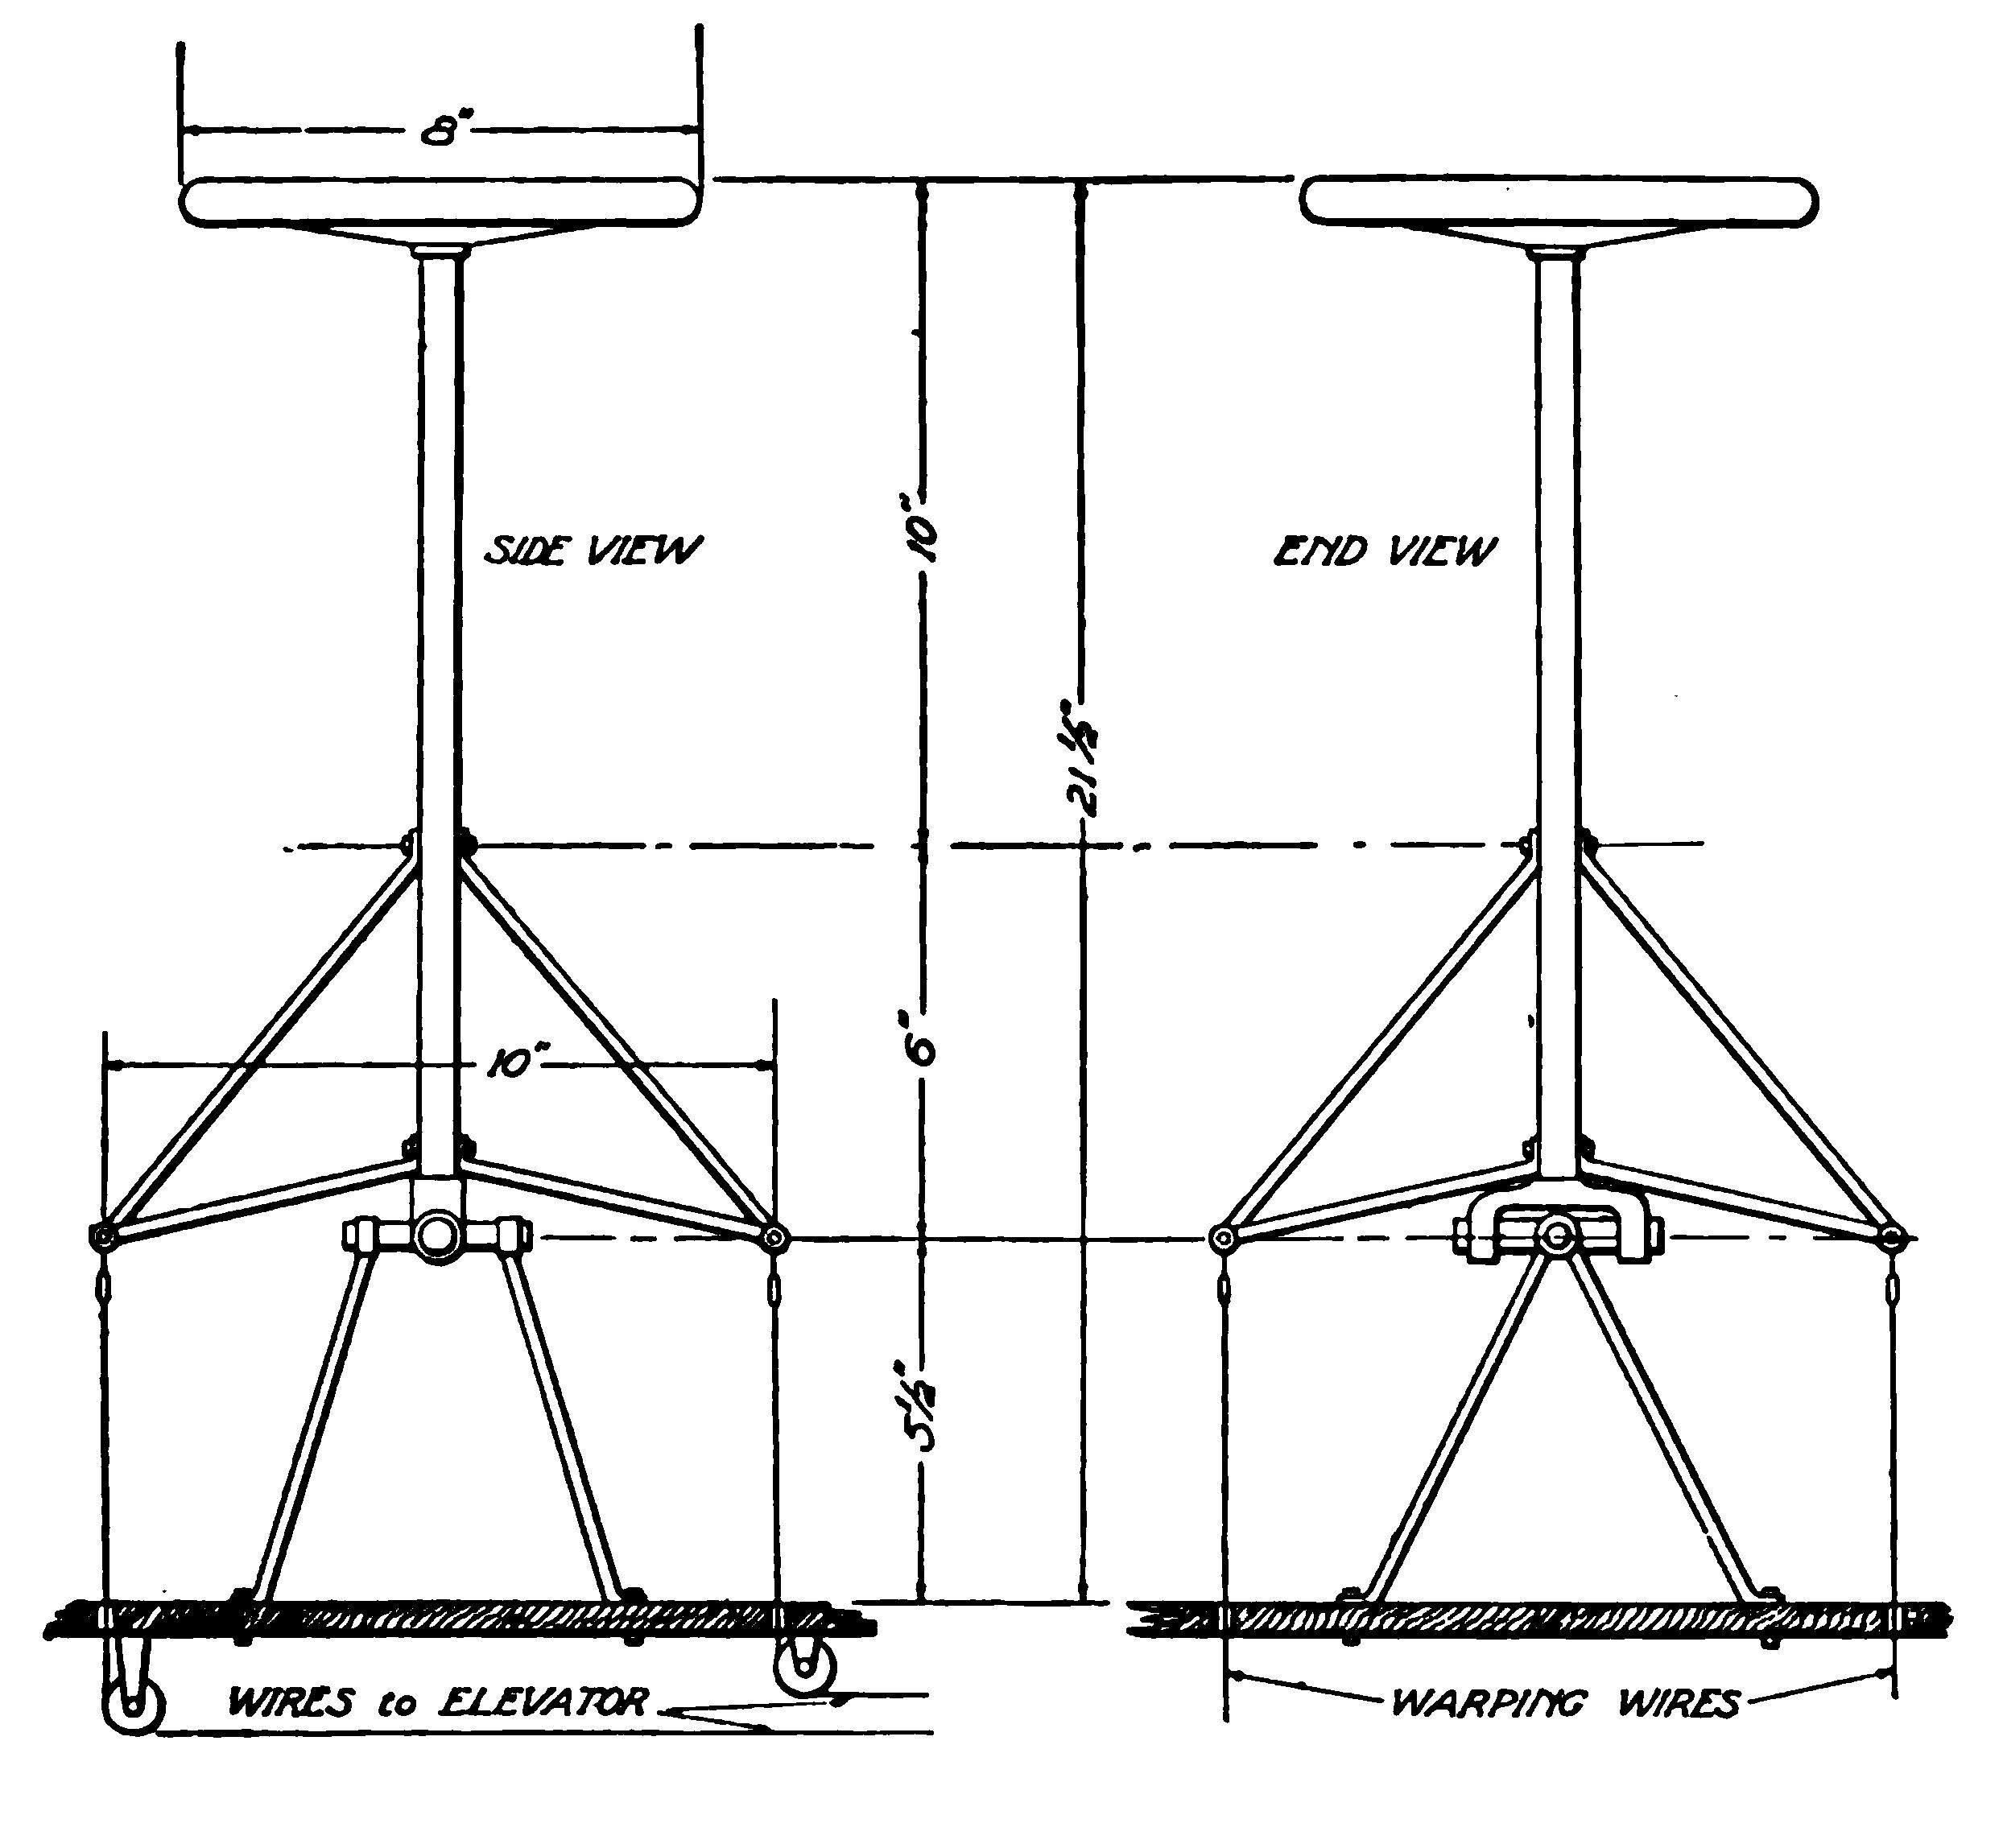 Fig. 32. Control Device of Steel Tubing instead of Bleriot "Cloche"